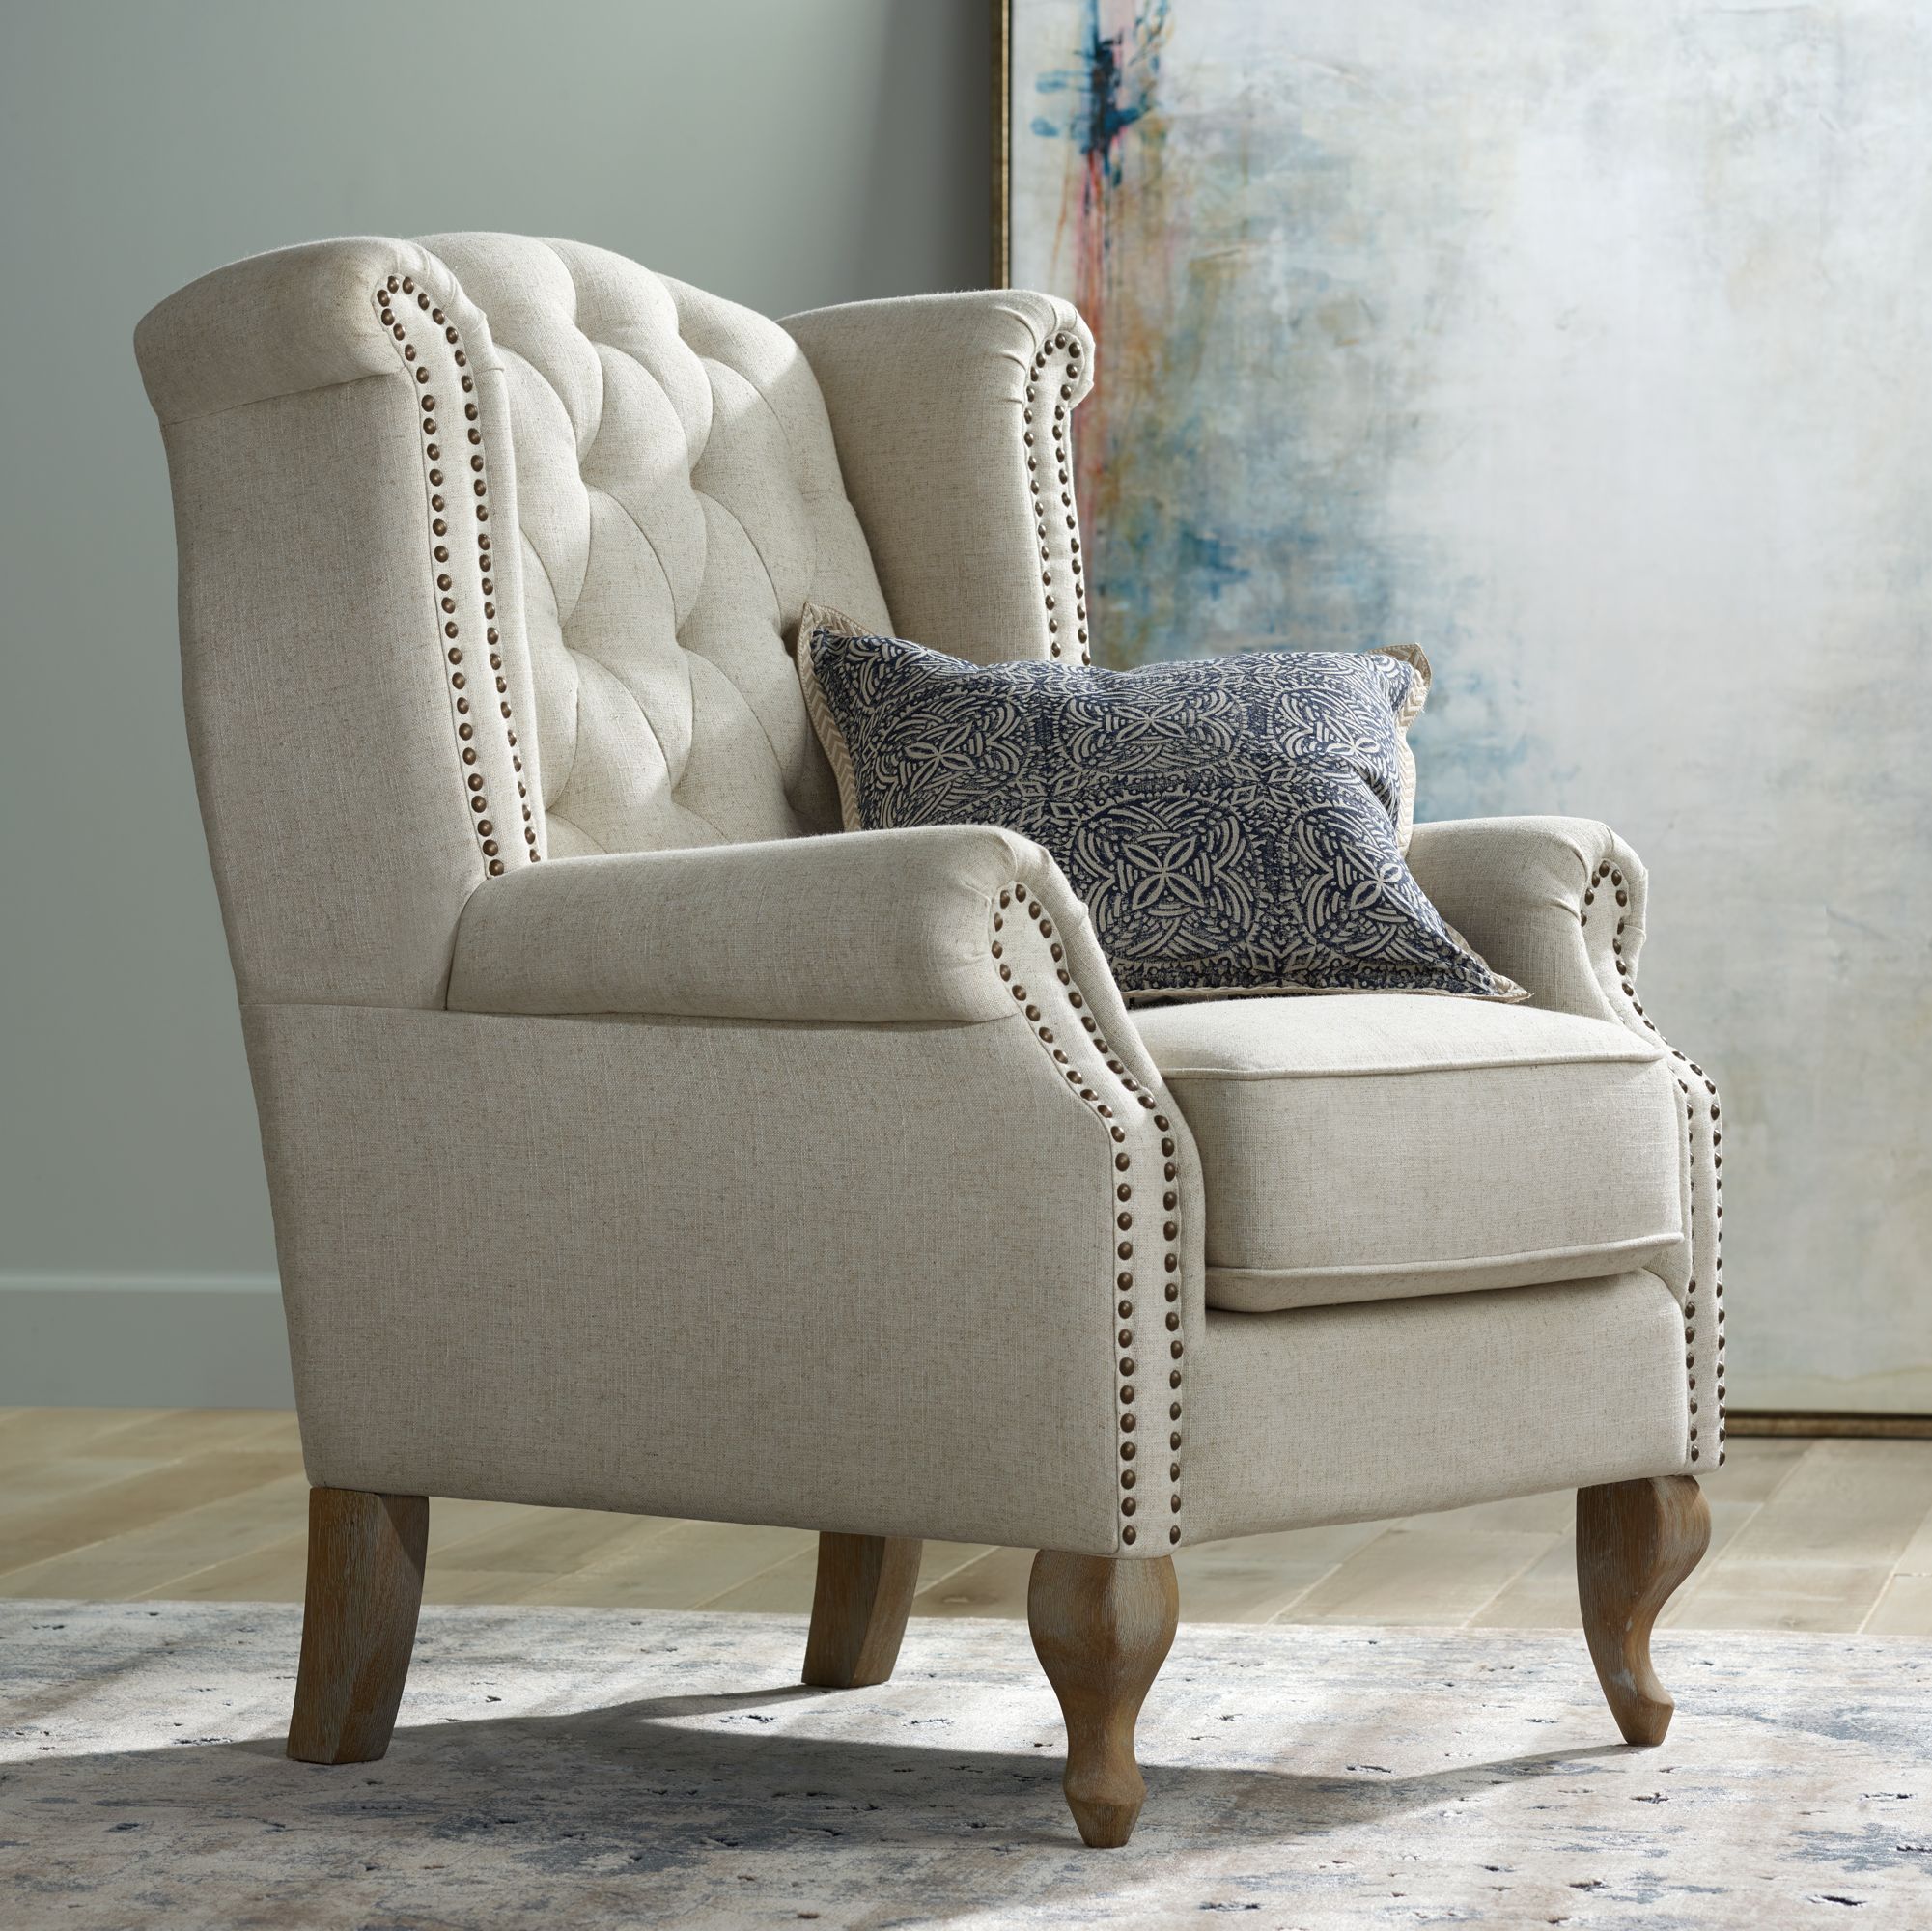 Williamsburg Natural Linen Tufted Wingback Armchair